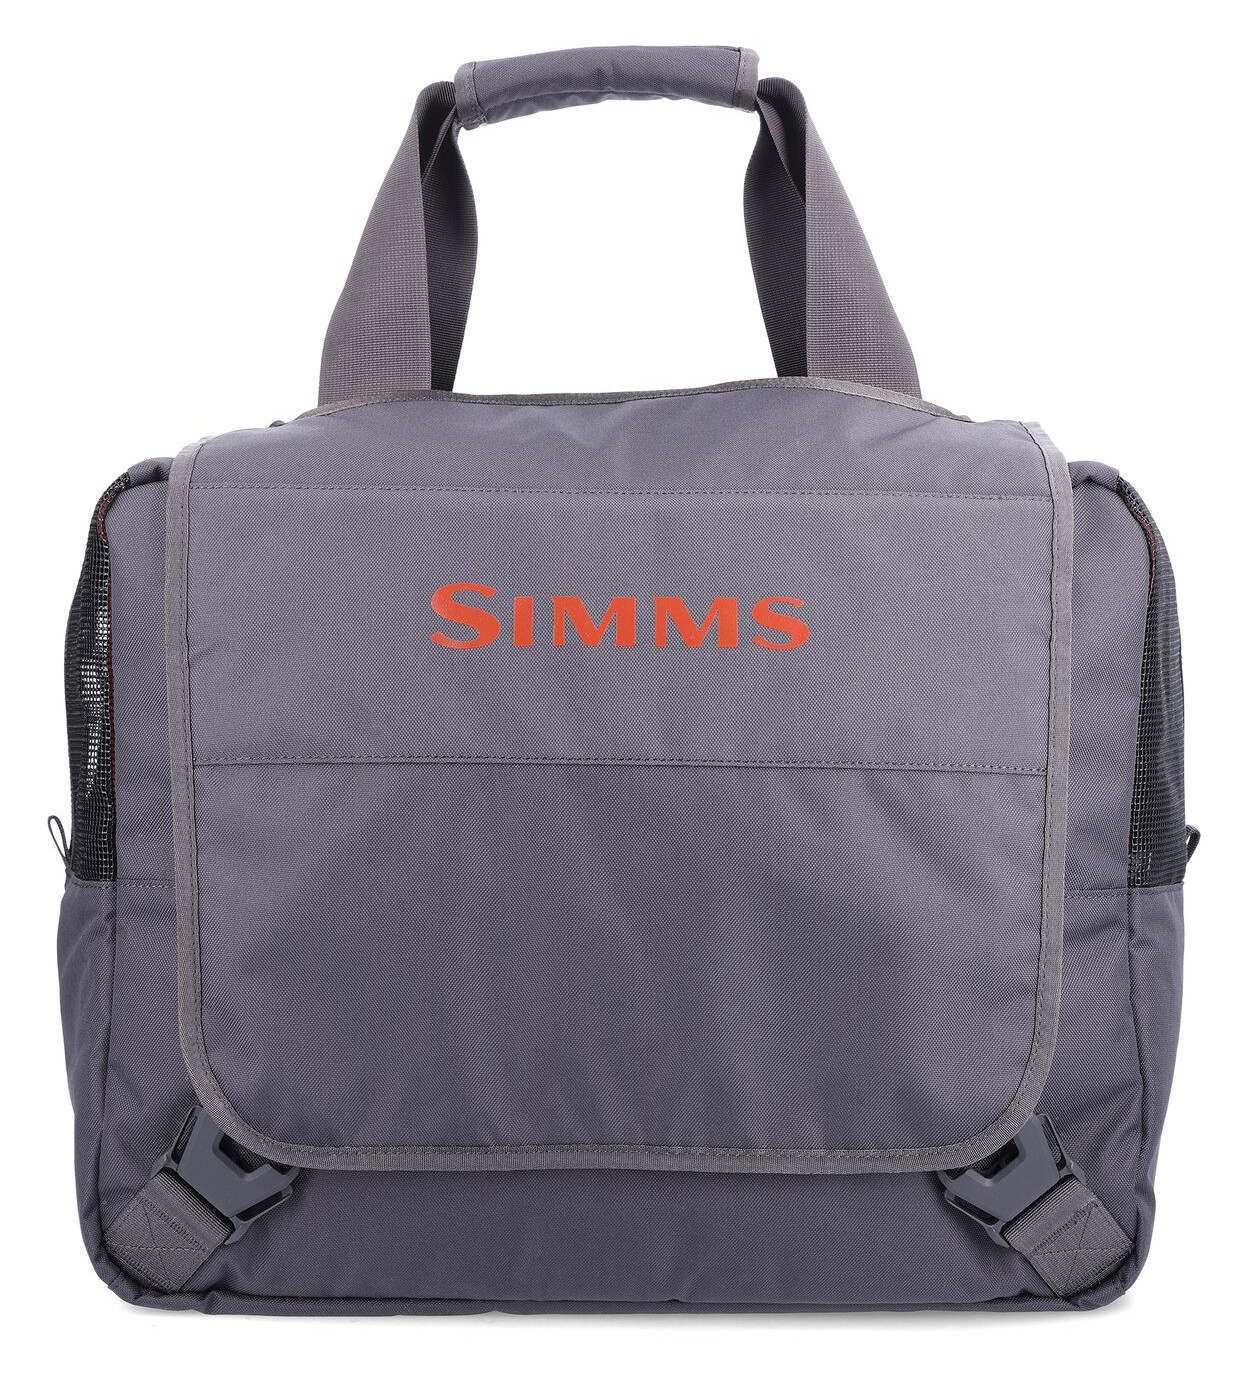 https://www.czechnymph.com/data/web/auto-imported-products/simms/simms-riverkit-wader-tote-44109162.jpg